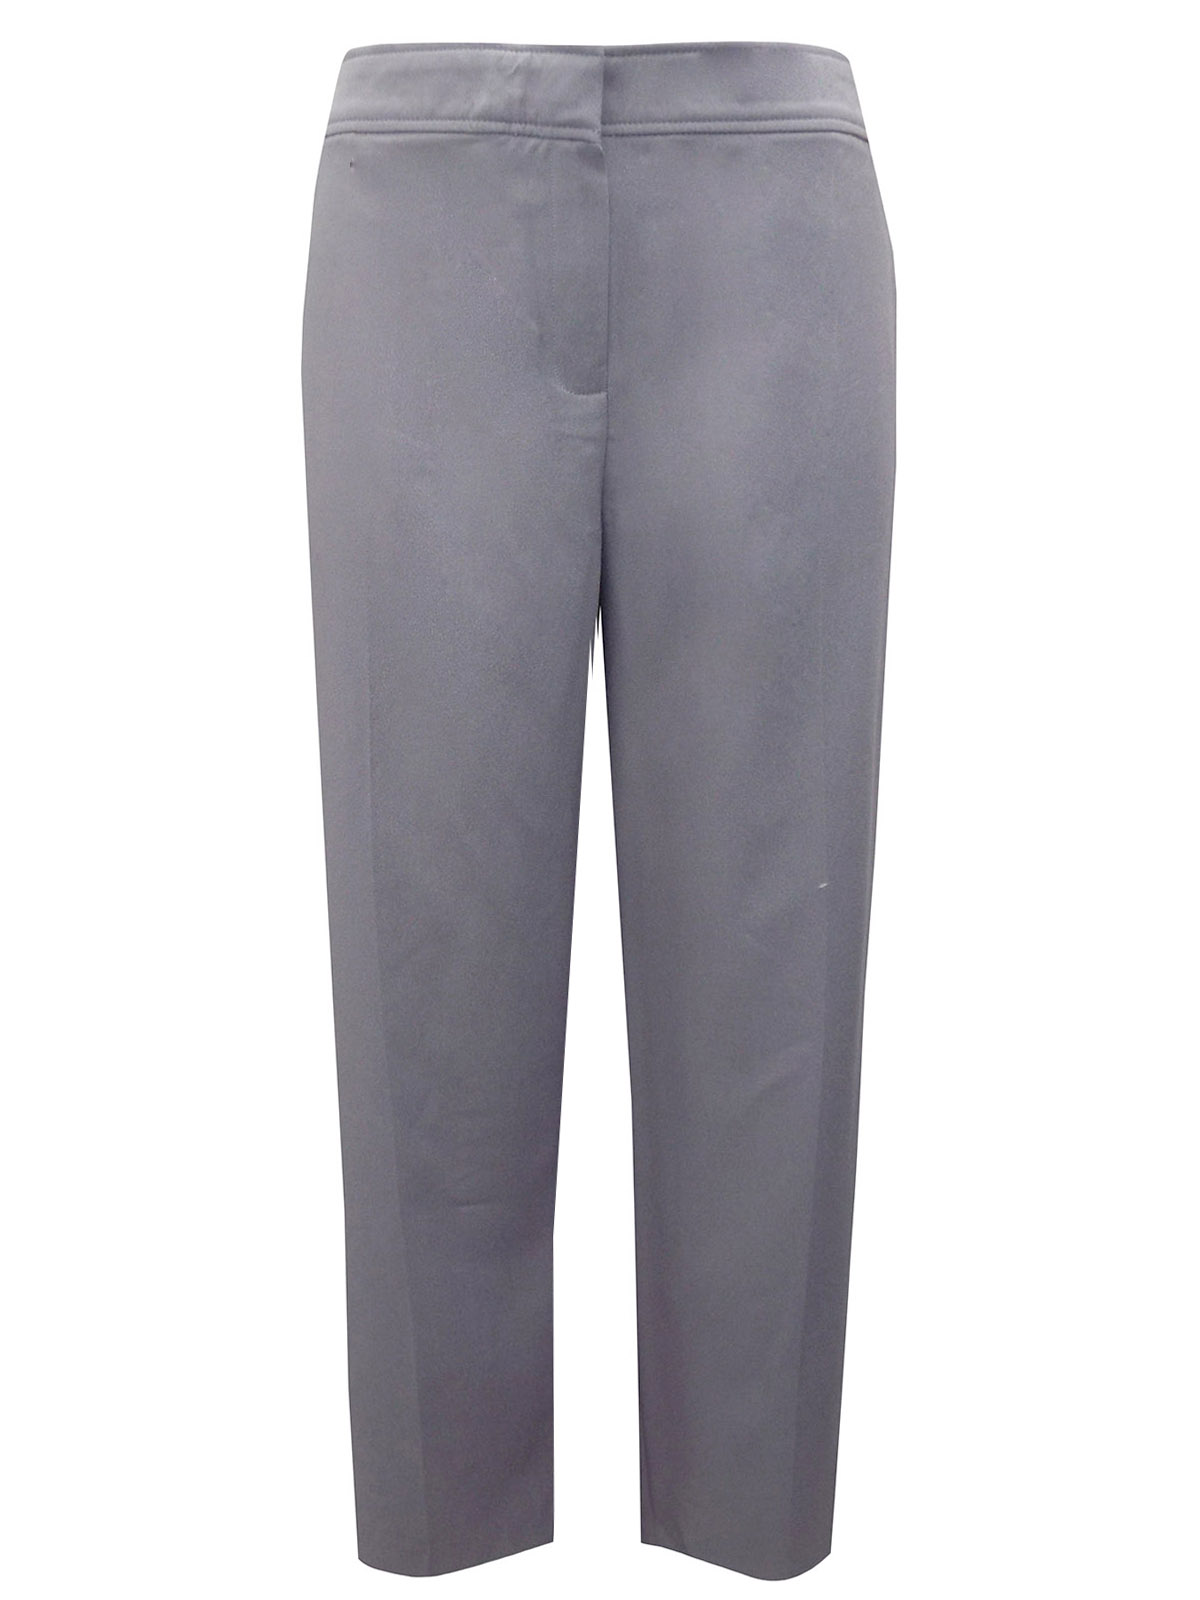 Marks and Spencer - - M&5 GREY High Rise Wide Leg Trousers - Size 6 to 24